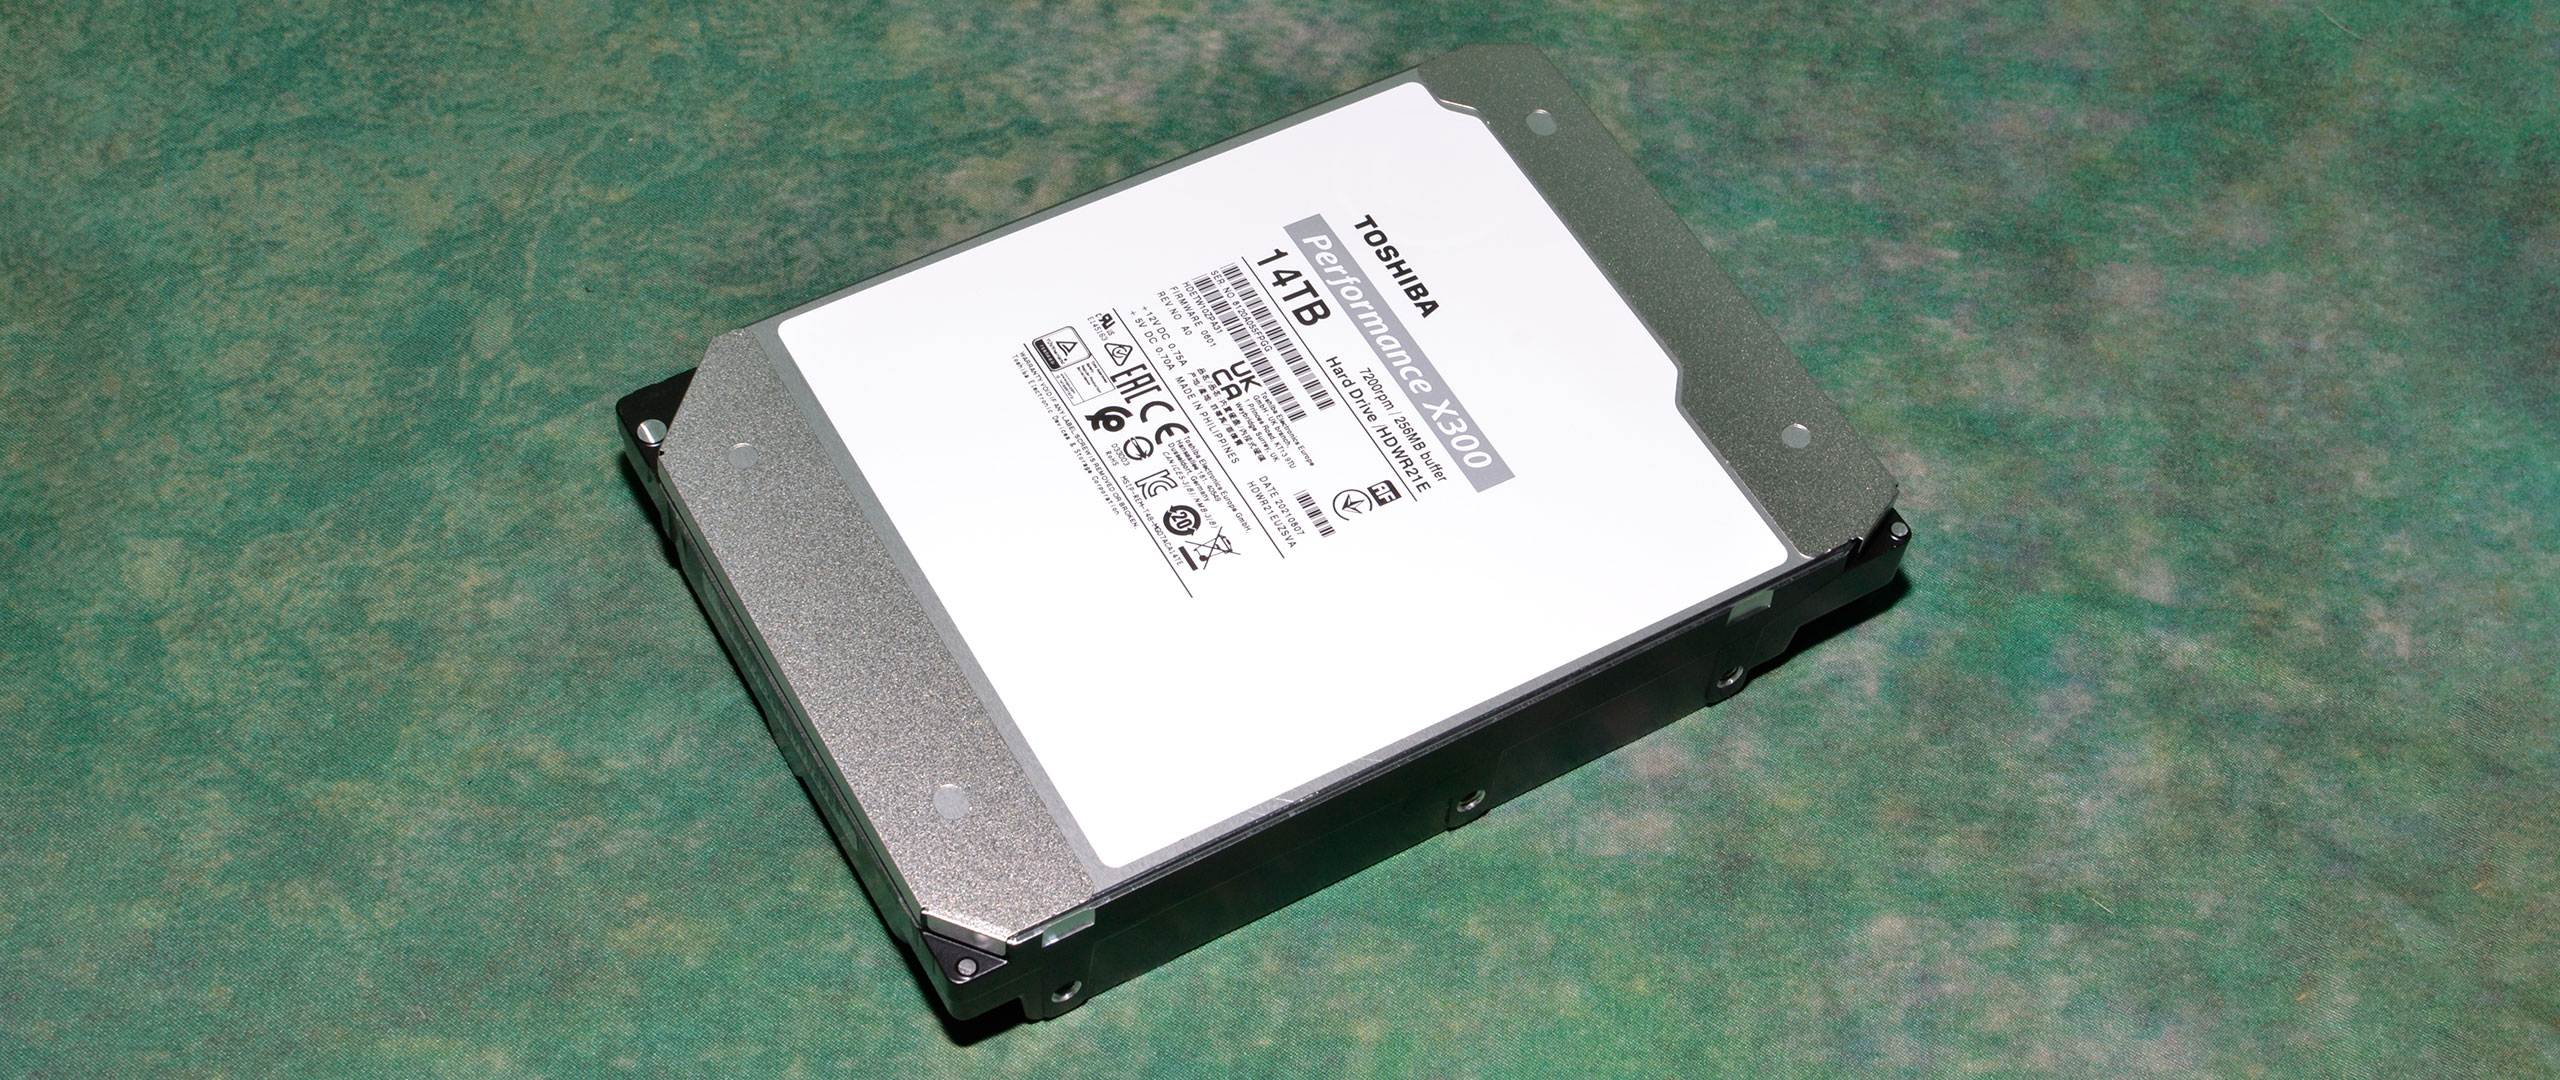 Toshiba X300 14TB HDD Review: A Swing and a Miss | Tom's Hardware